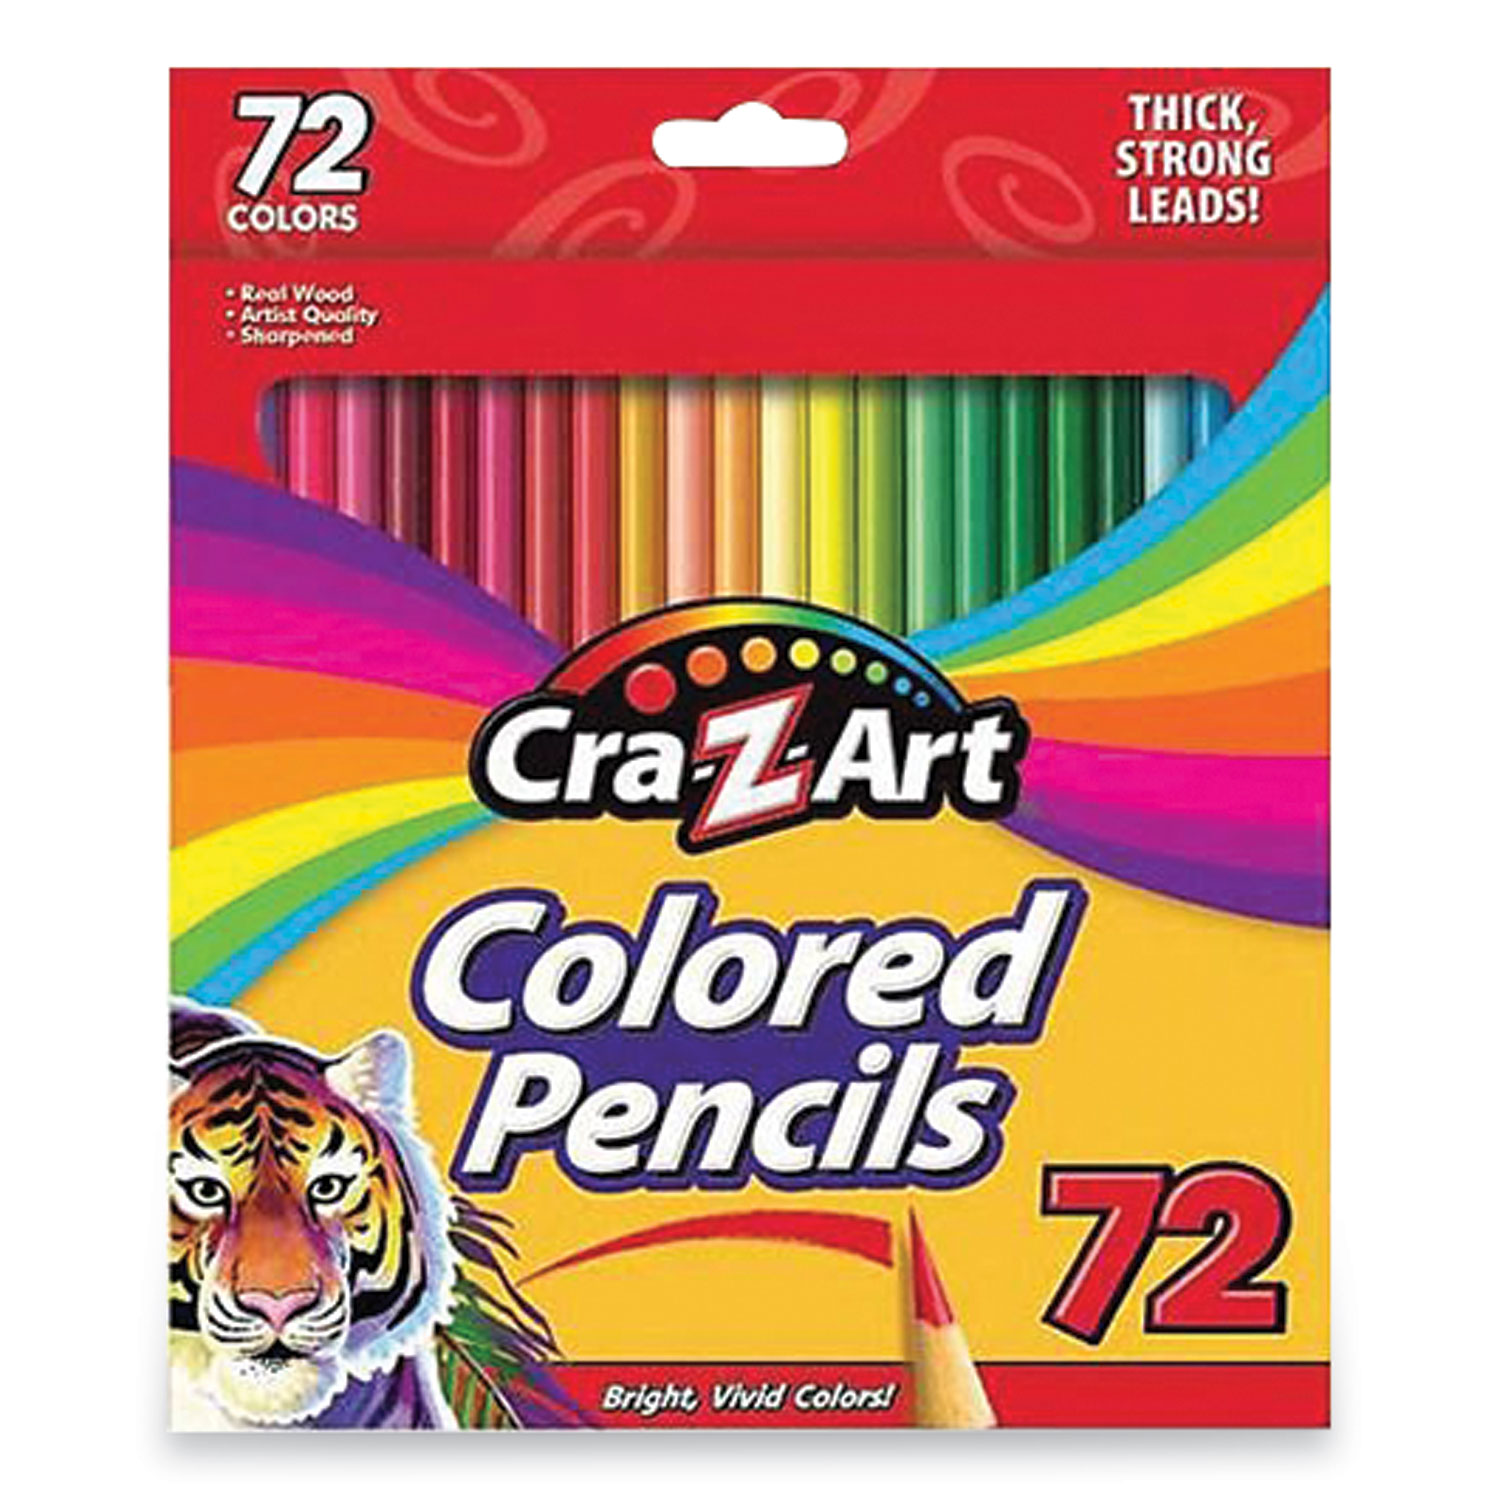 Cra-Z-Art Classic Colored Pencils, 72 Count, Multicolor, Beginner Child to Adult, Back to School - image 1 of 9